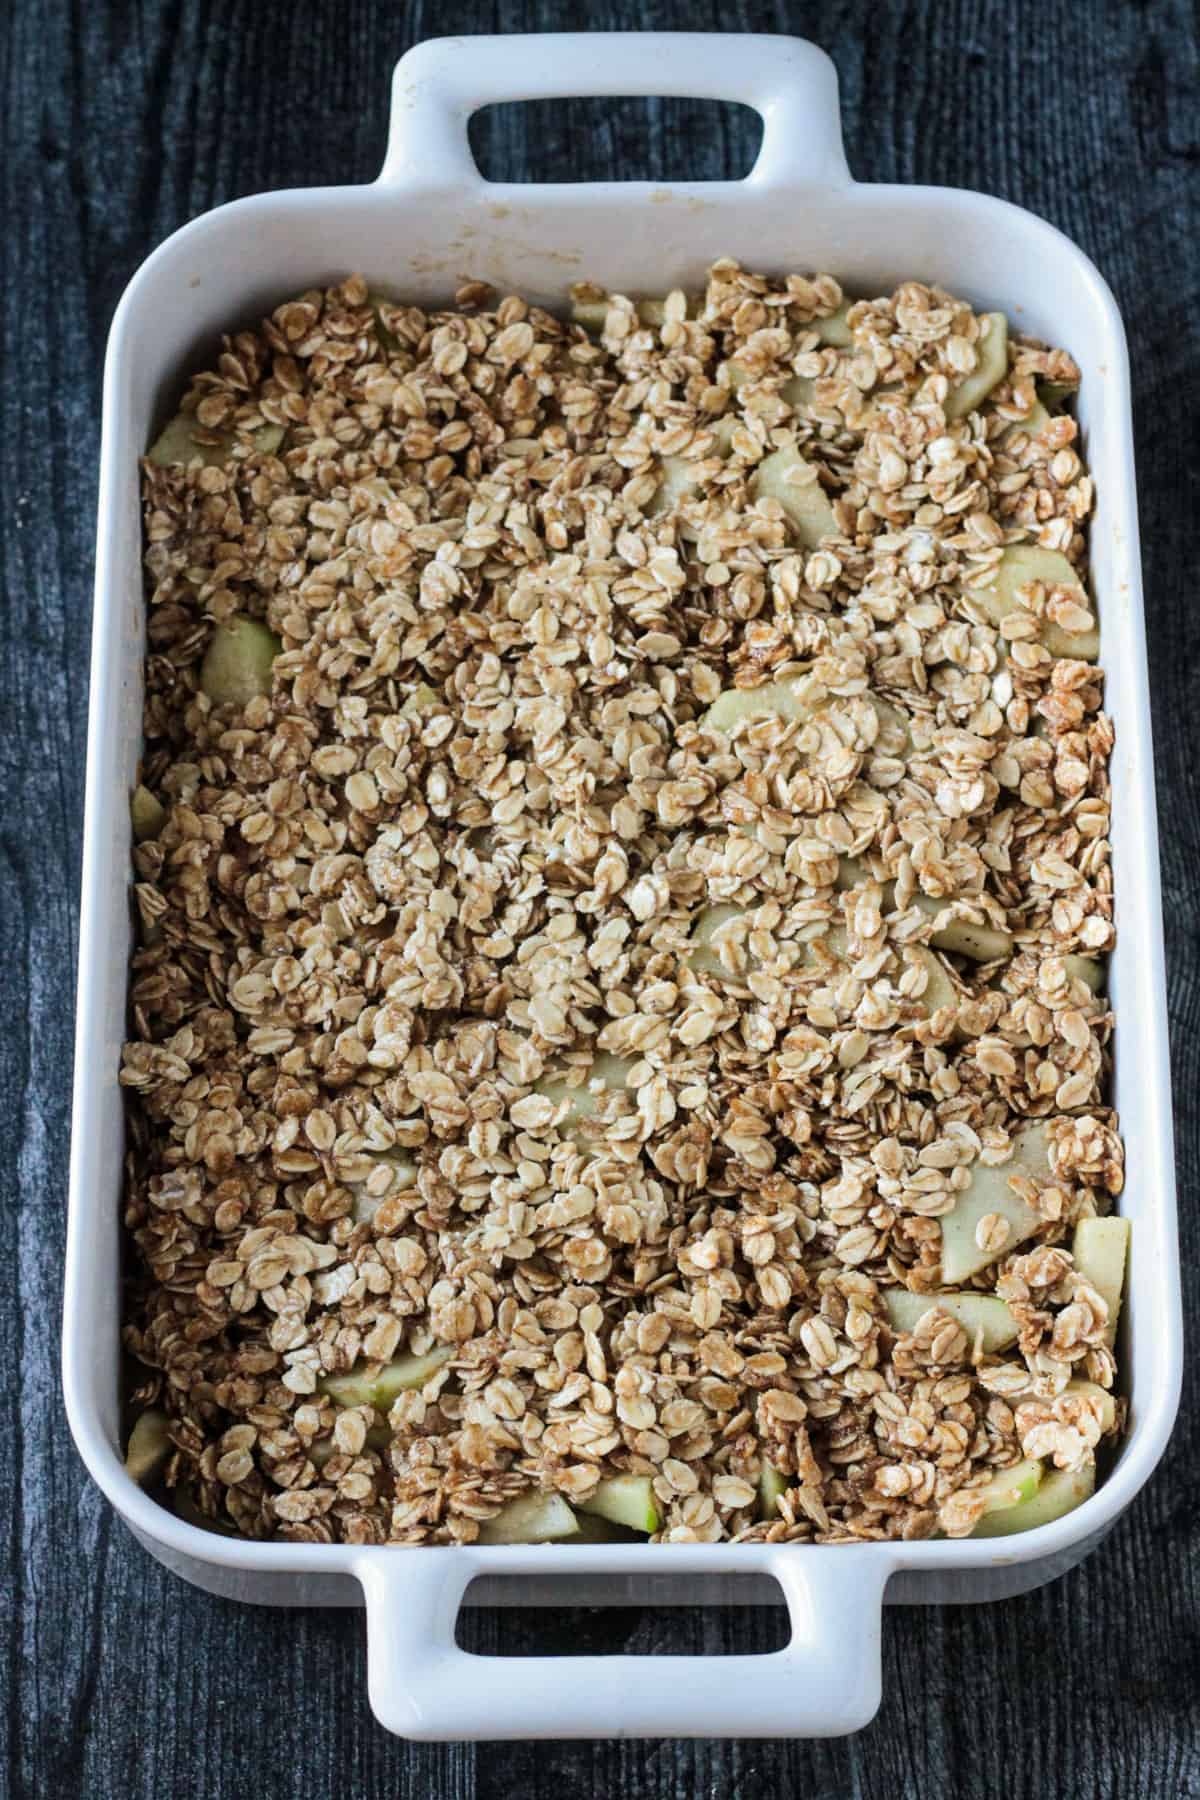 Pan of apple crisp mixture ready to go in the oven for baking.